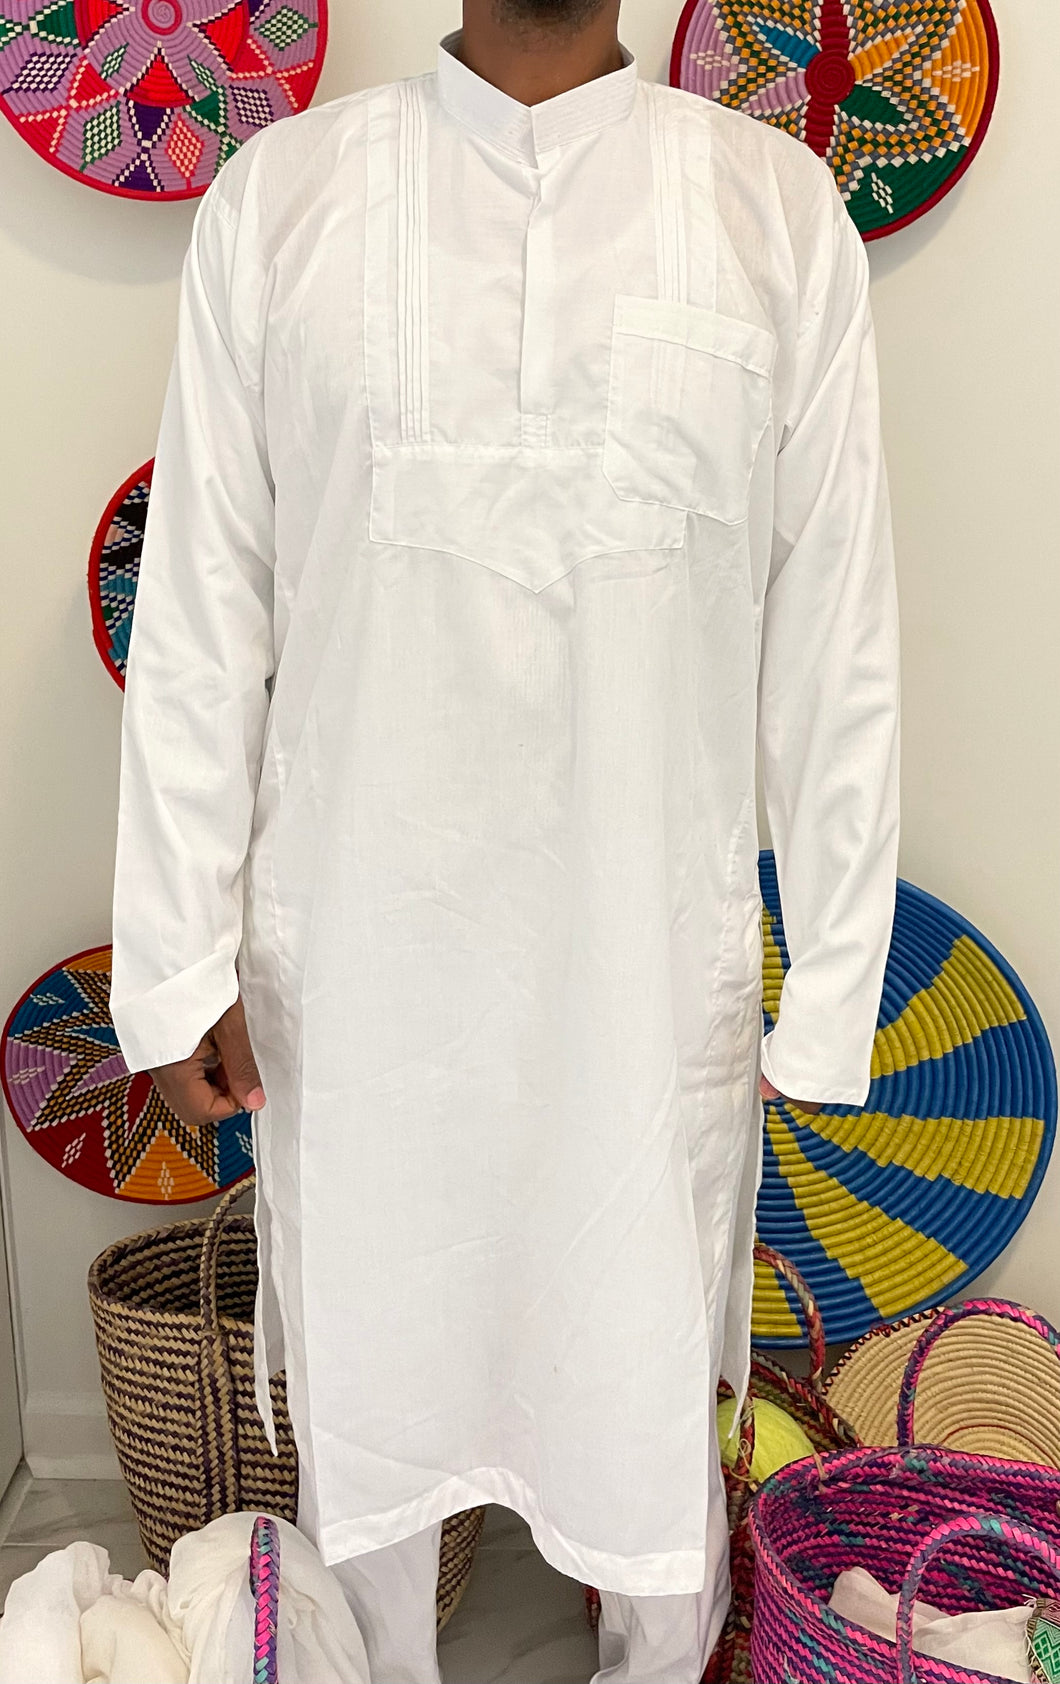 Men’s traditional outfit